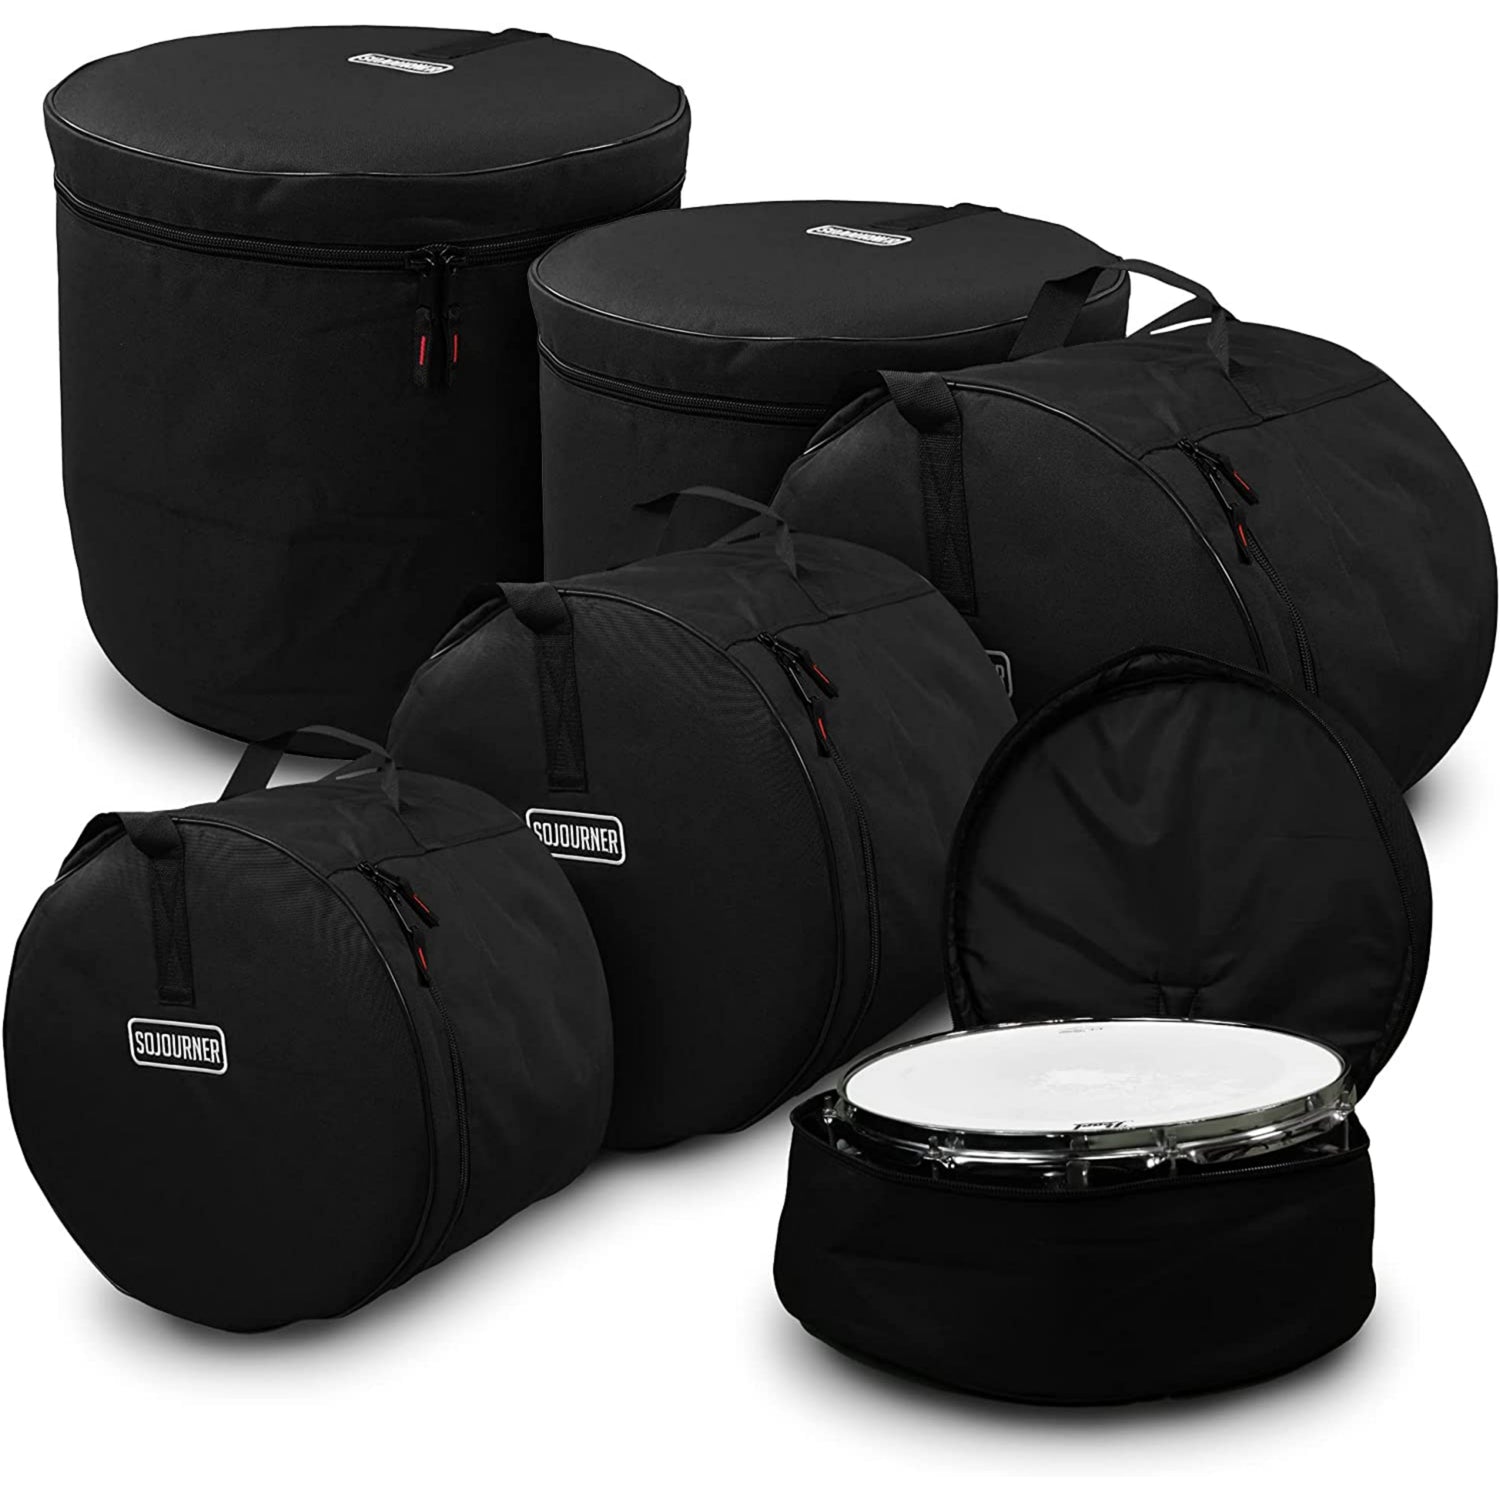 Drum bags, cases and covers